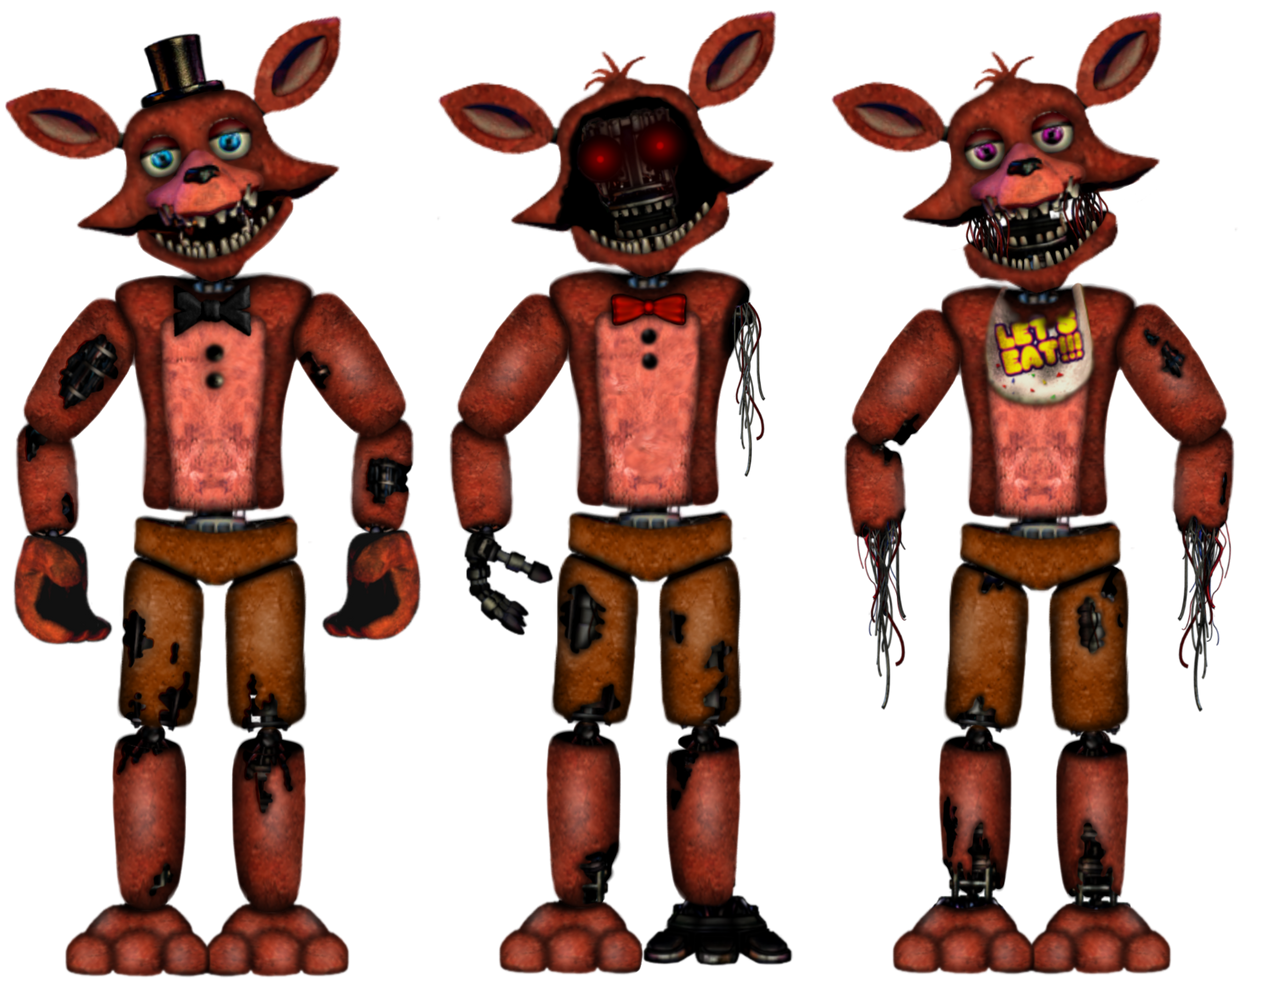 FNAF 2Edit-Fixed Withered Foxy by Fredluestudios2021 on DeviantArt